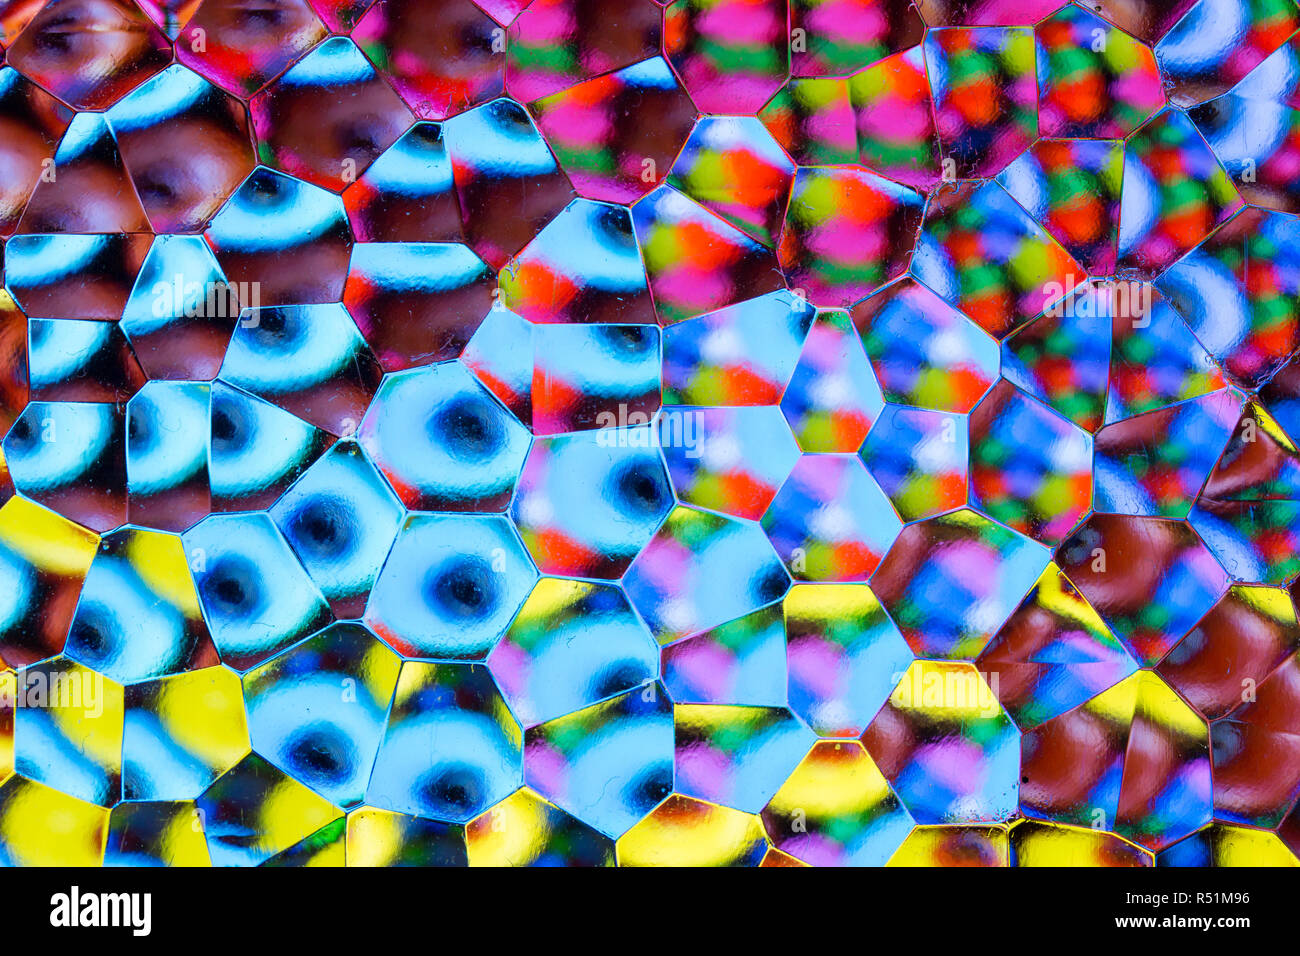 Extreme close up abstract colourful background through frosted glass Stock Photo